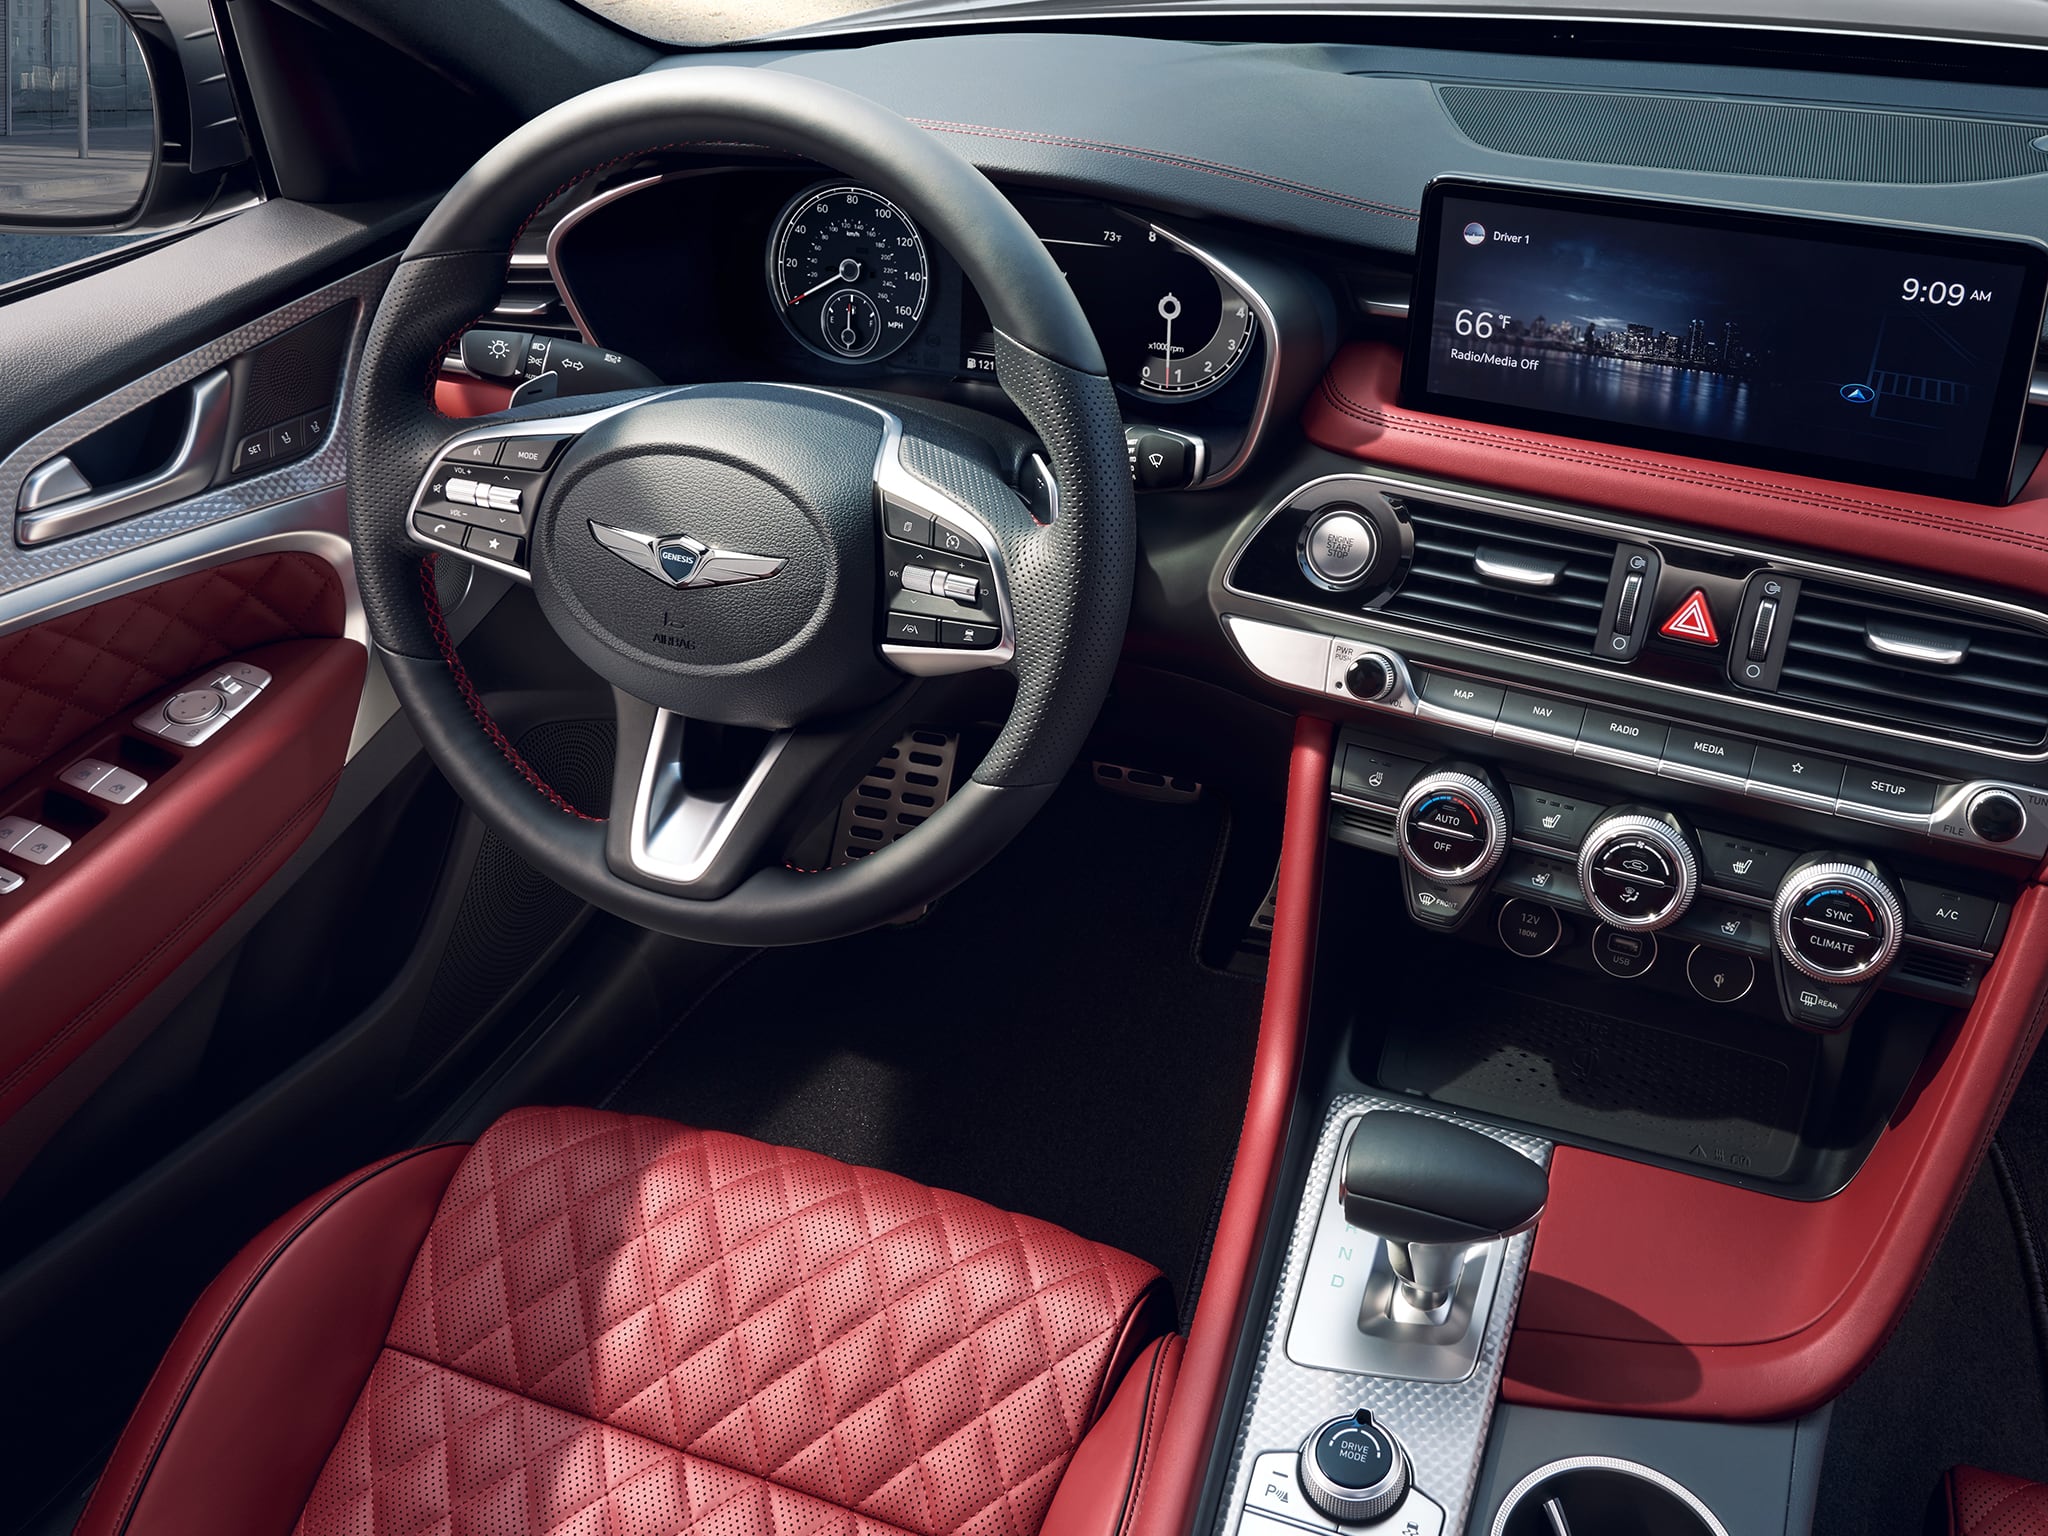 2022 Genesis G70 with a driver focused interior and digital gauge cluster.